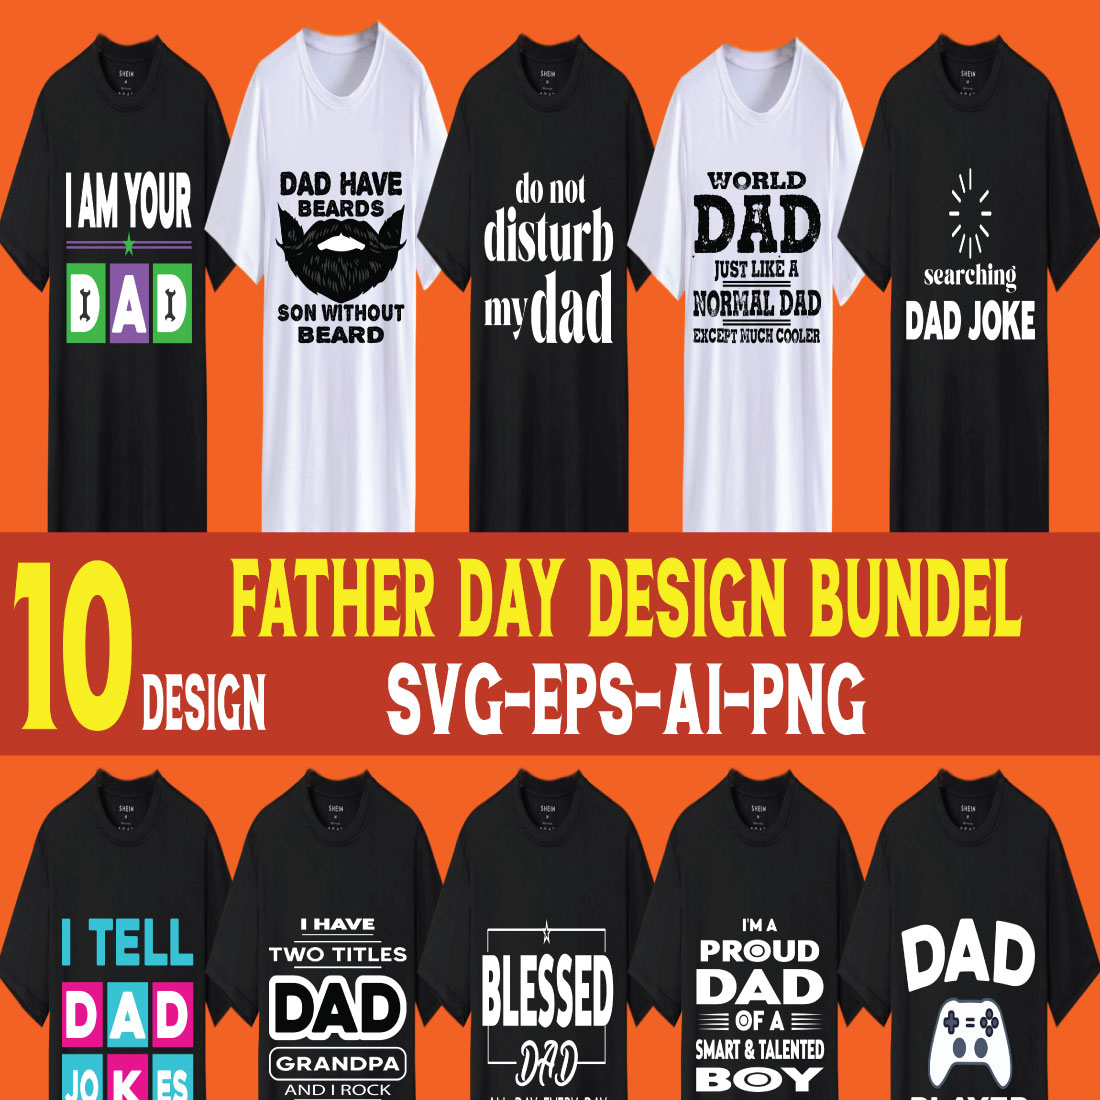 This is Special Father's Day T-shirt Design cover image.